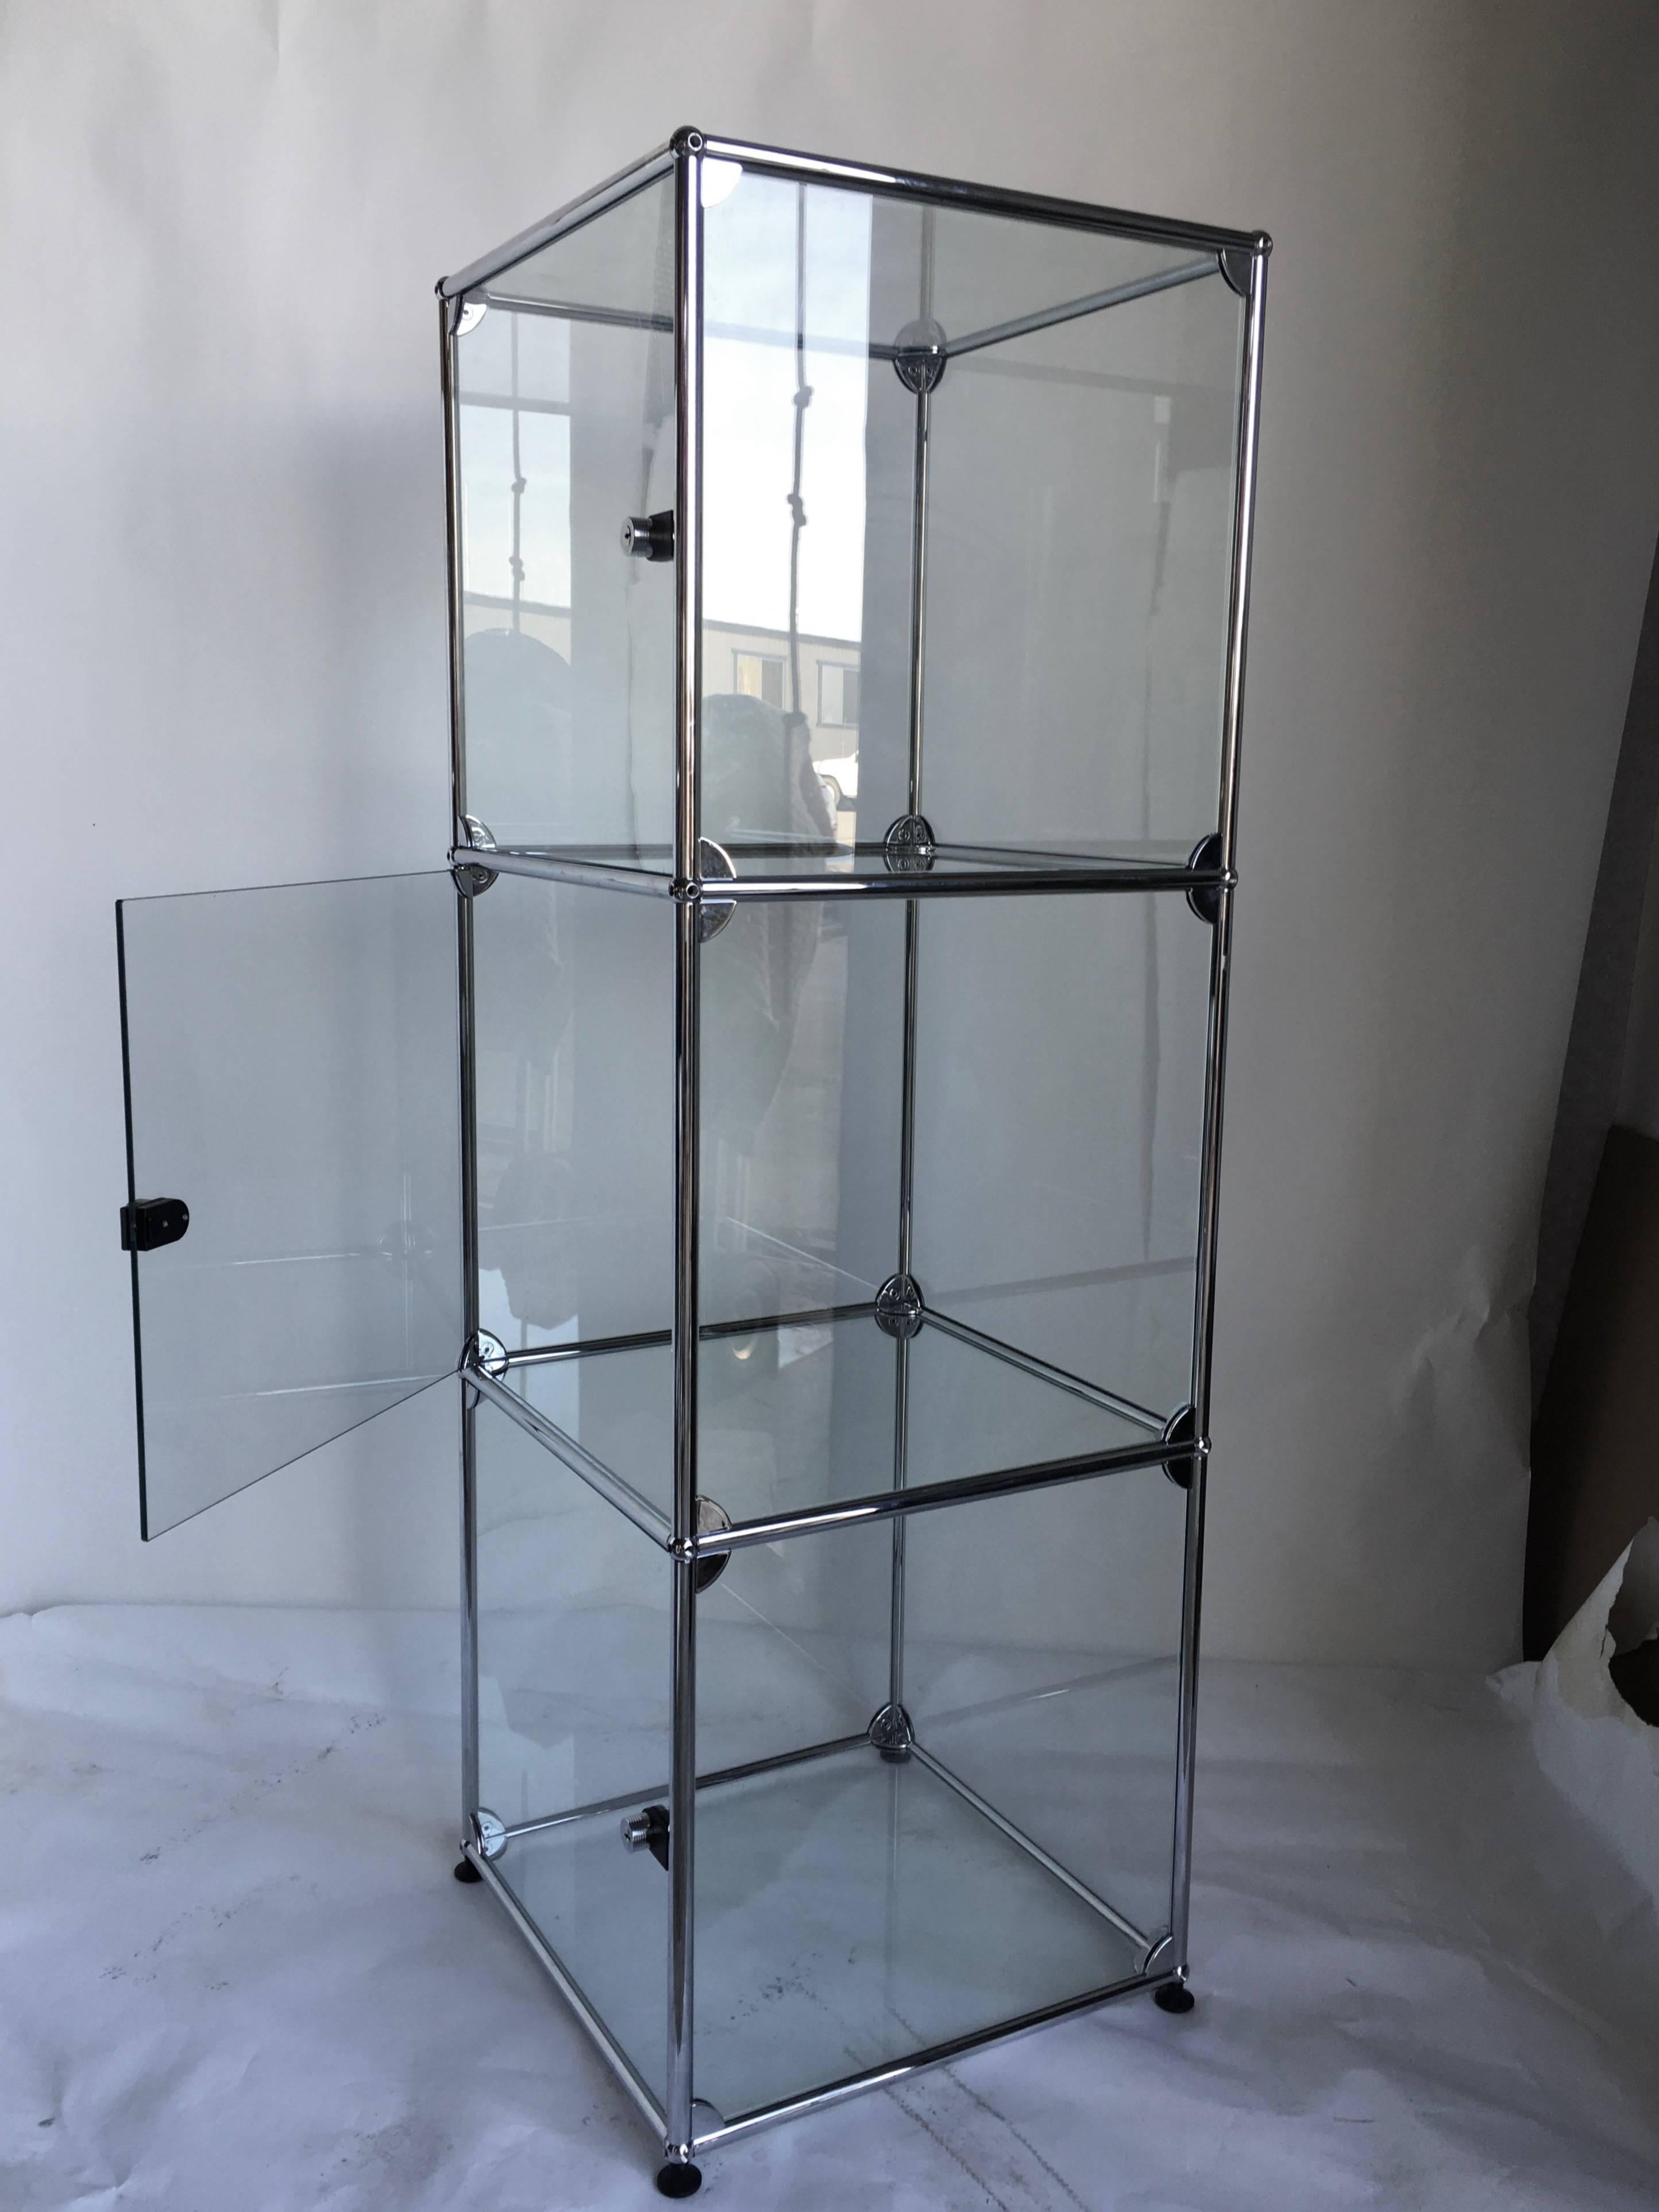 Fritz Haller High Modernist Vitrine In Excellent Condition For Sale In Treasure Island, CA